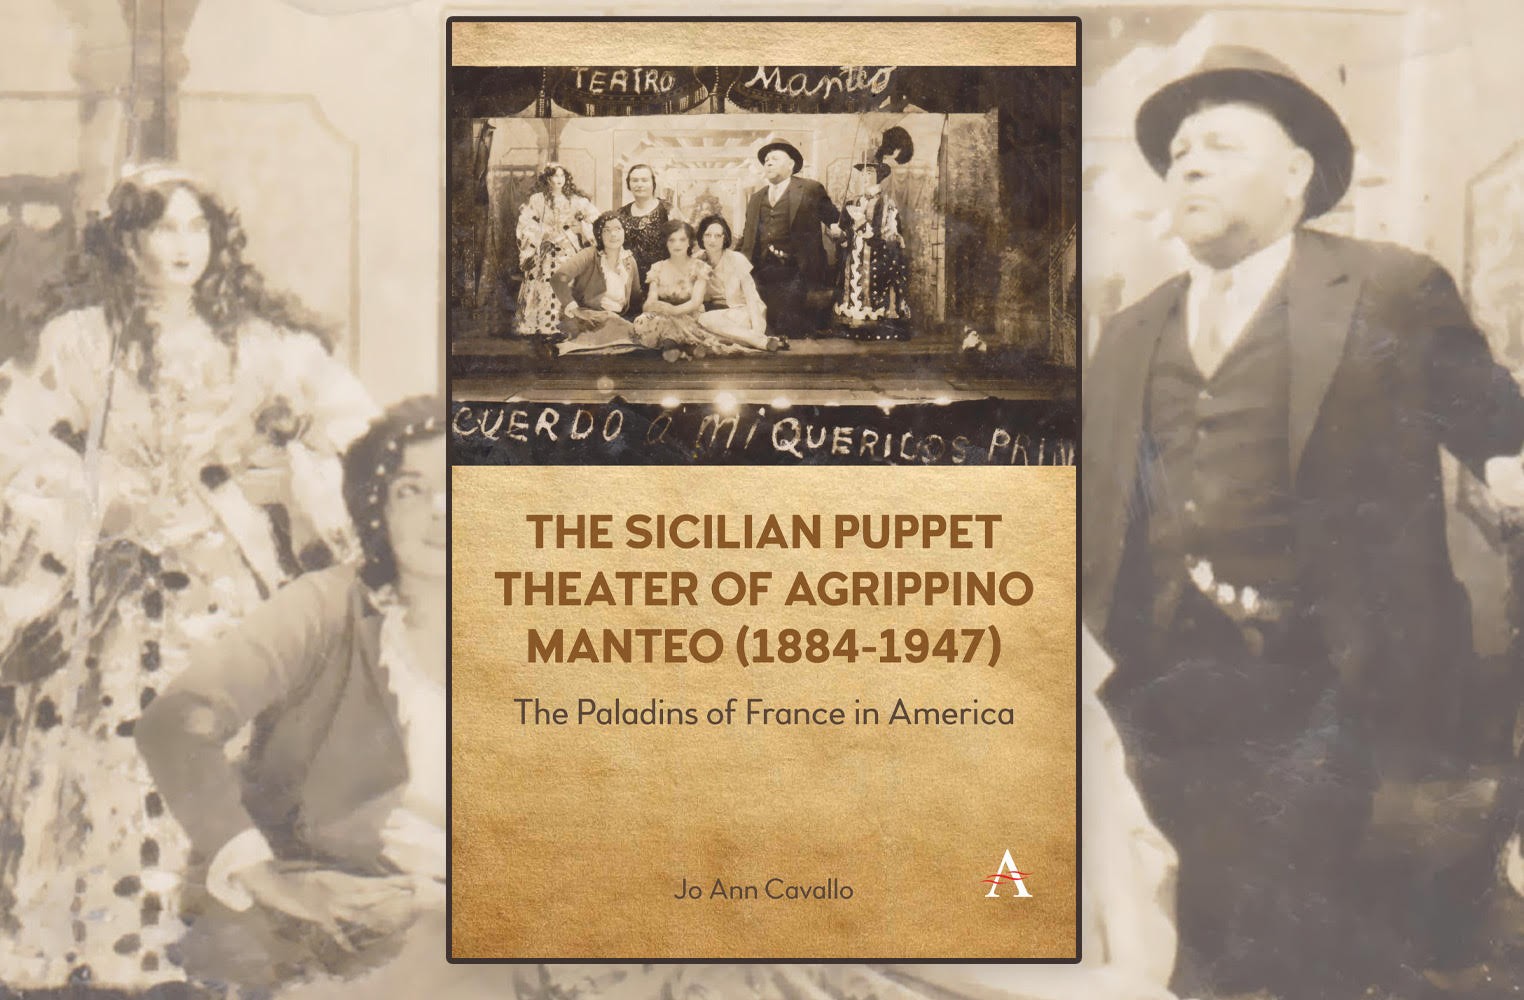 The Sicilian Puppet Theater of Agrippino Manteo (1884-1947)